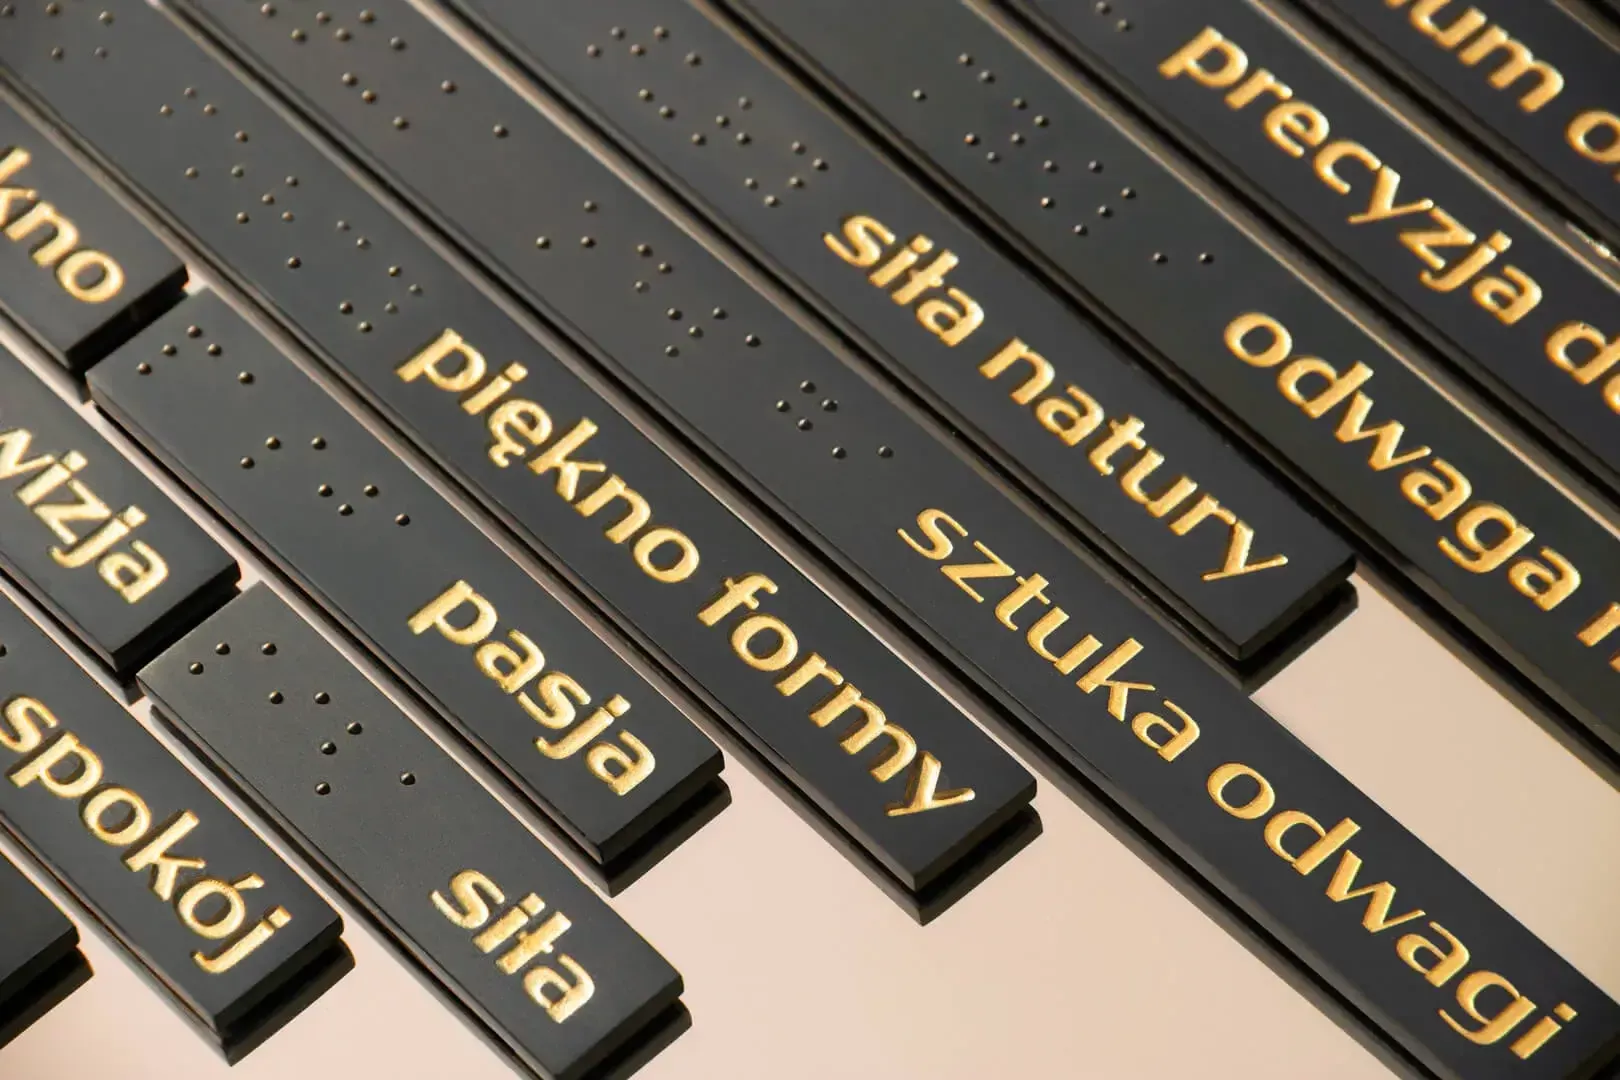 Information plate - gold letters on black plate and Braille notation